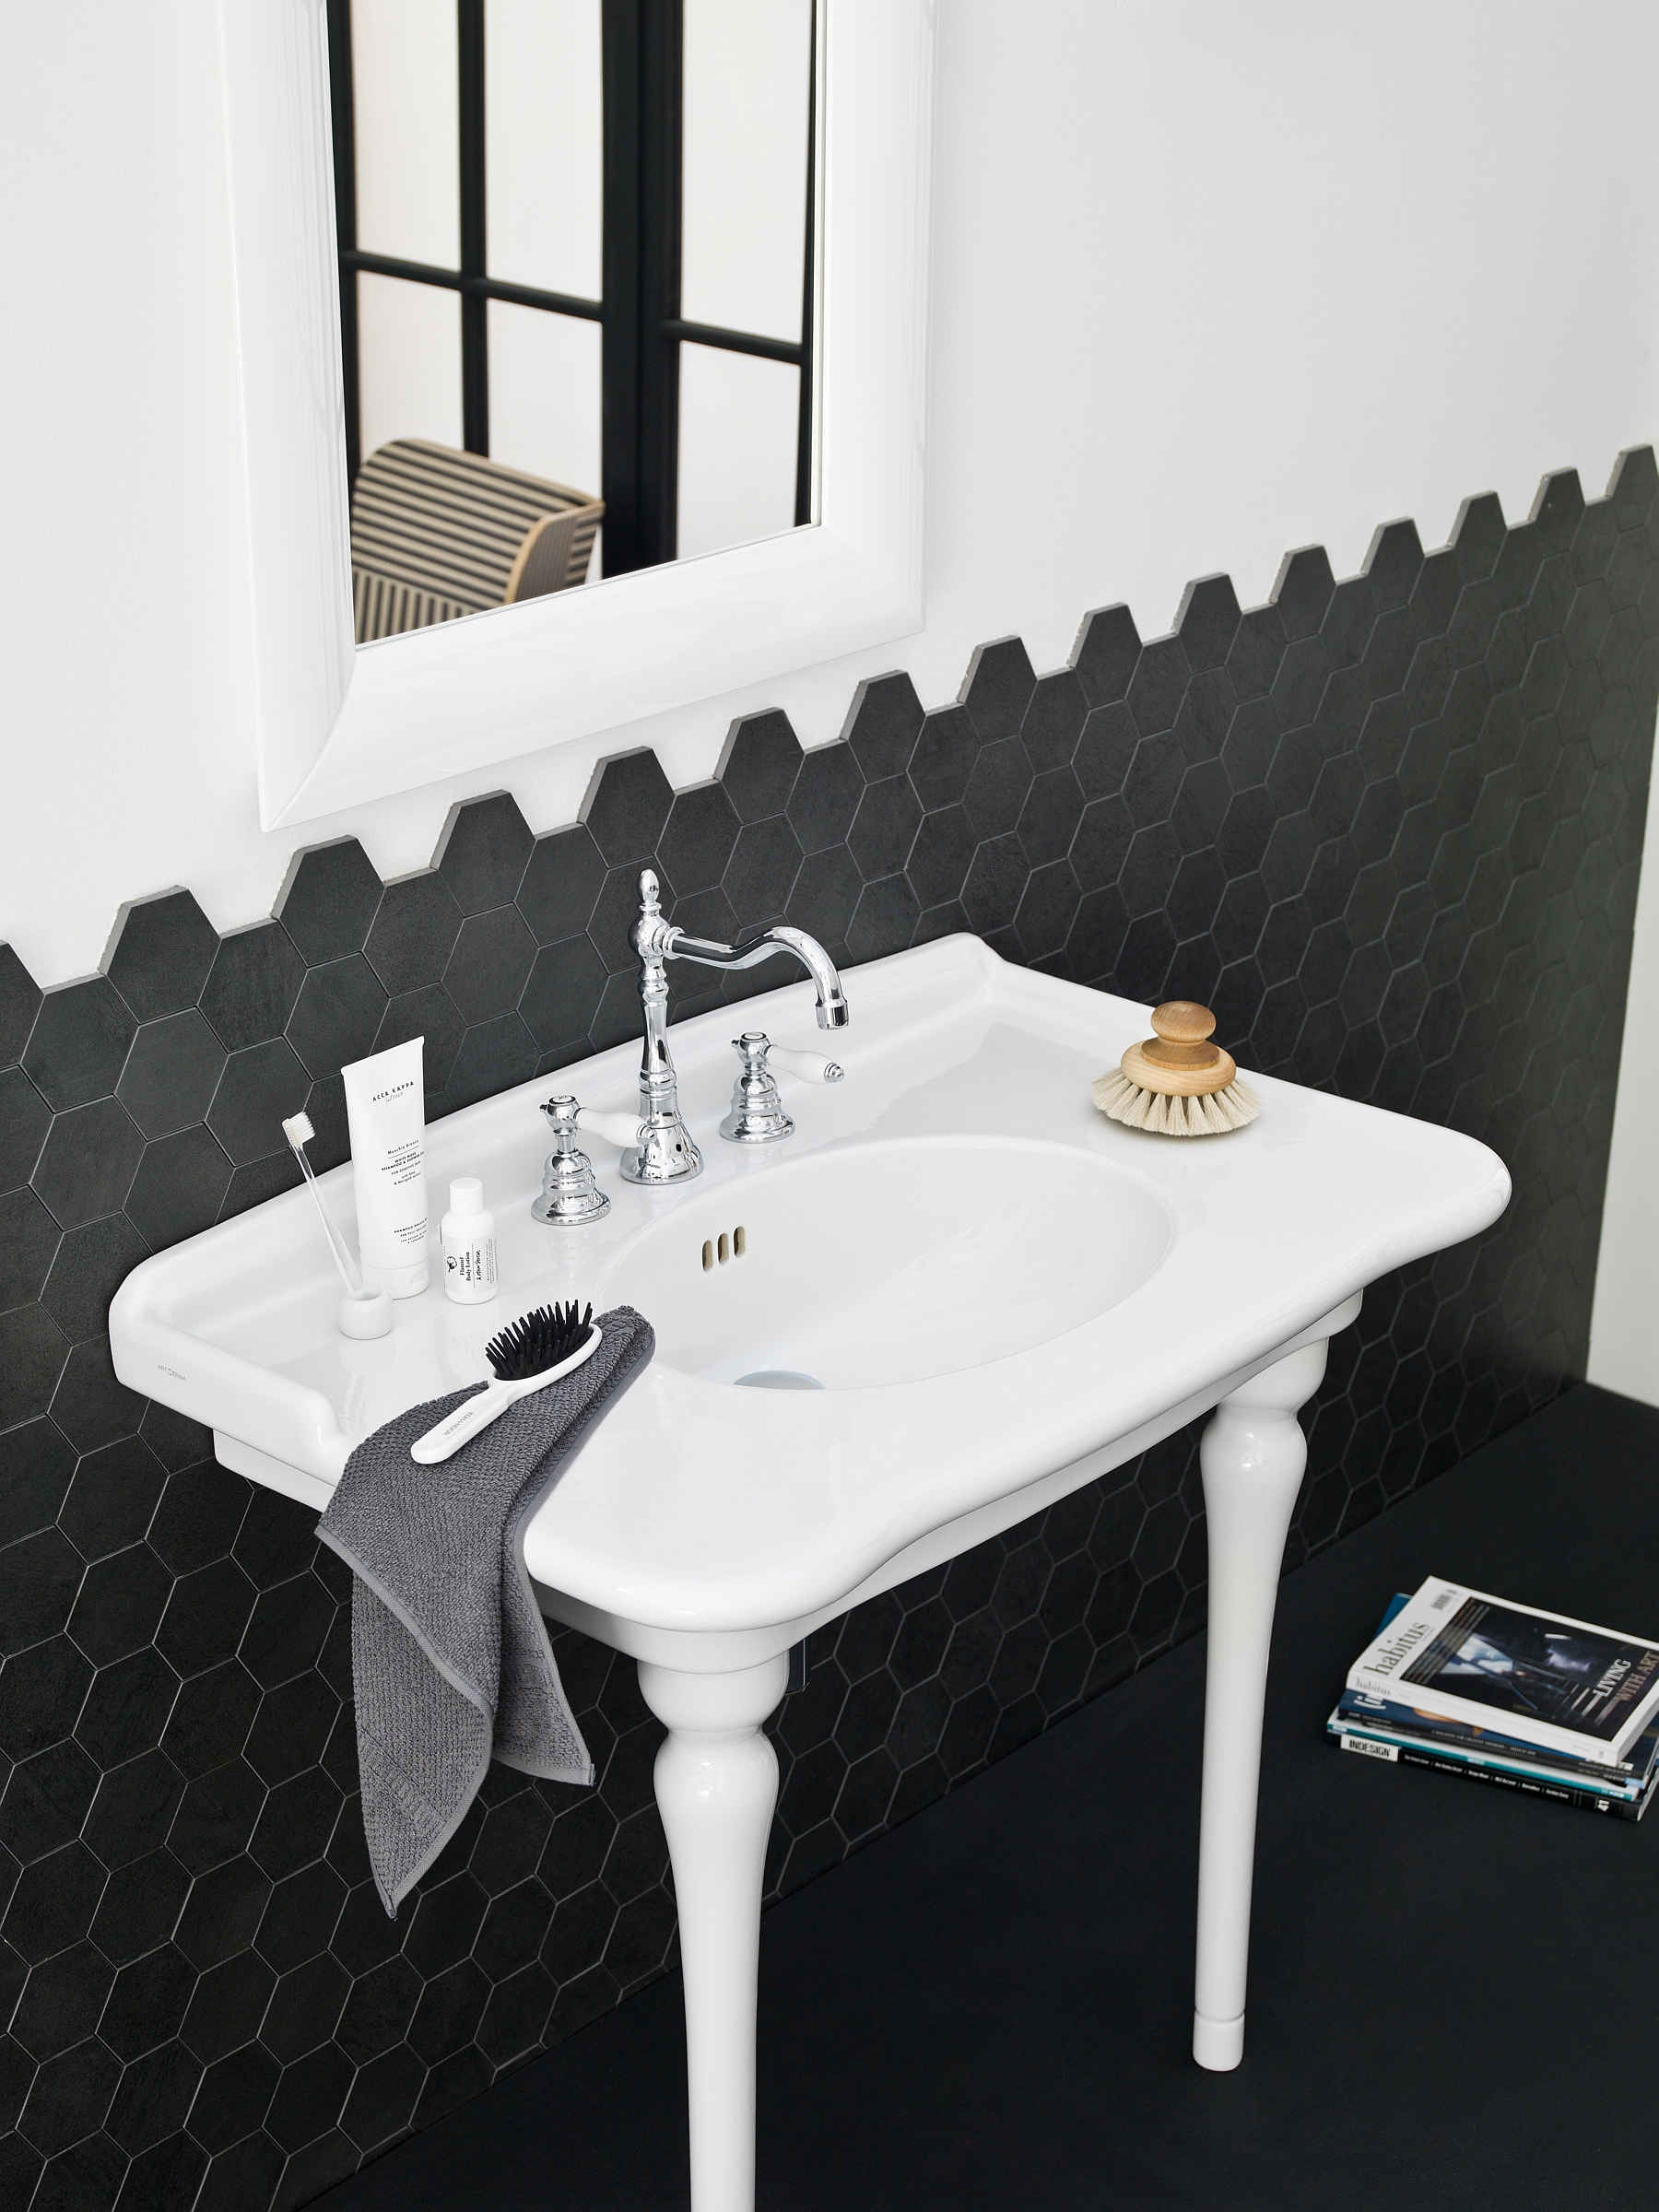 Give your contemporary bath an art deco appeal with the Hermitage lineup